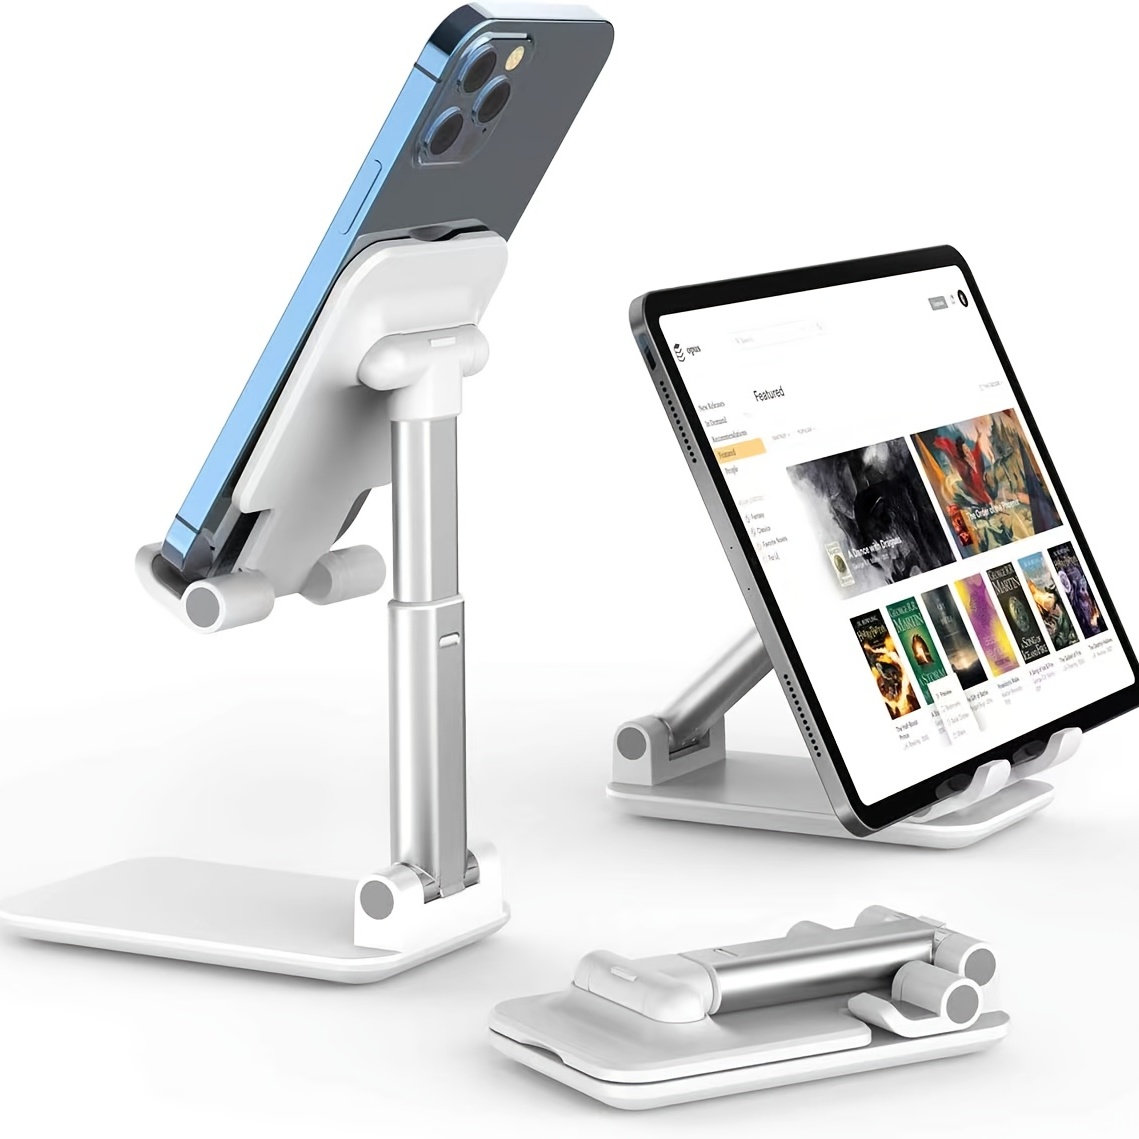 Foldable Tablet Stand Holder - Save on Our Store